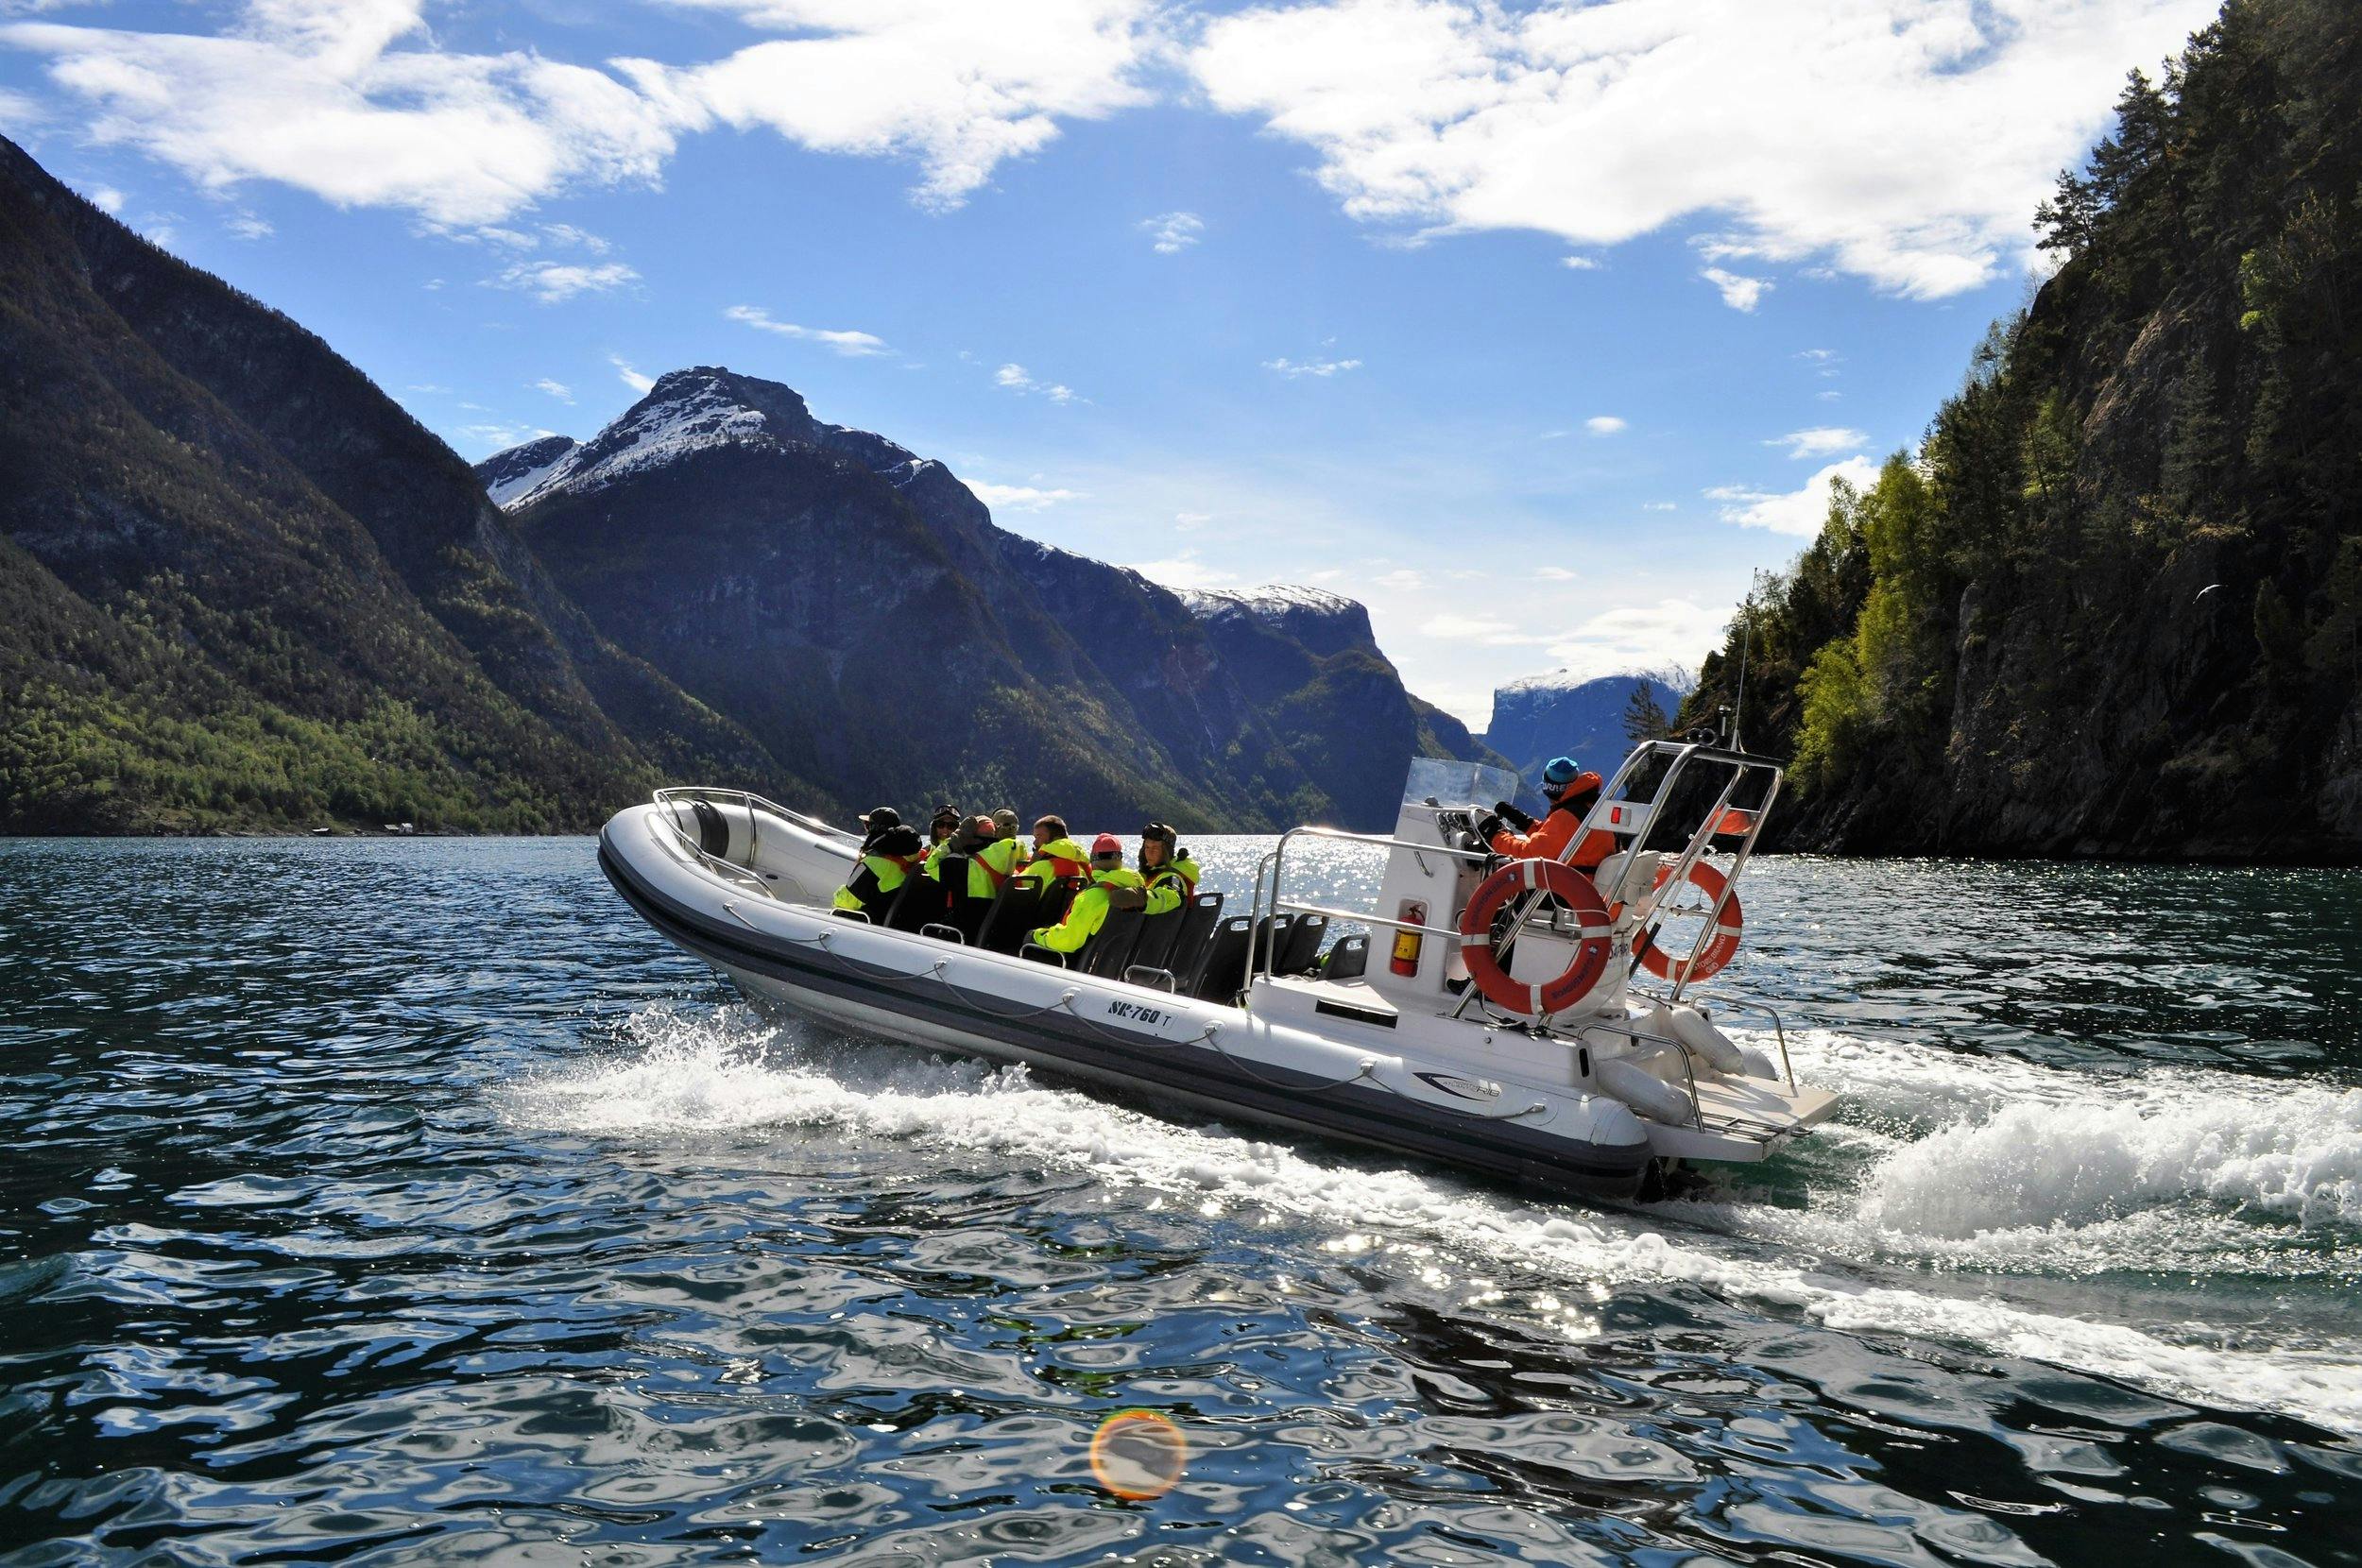 Private guided day-tour to Sognefjorden and Flåm with a Fjord safari